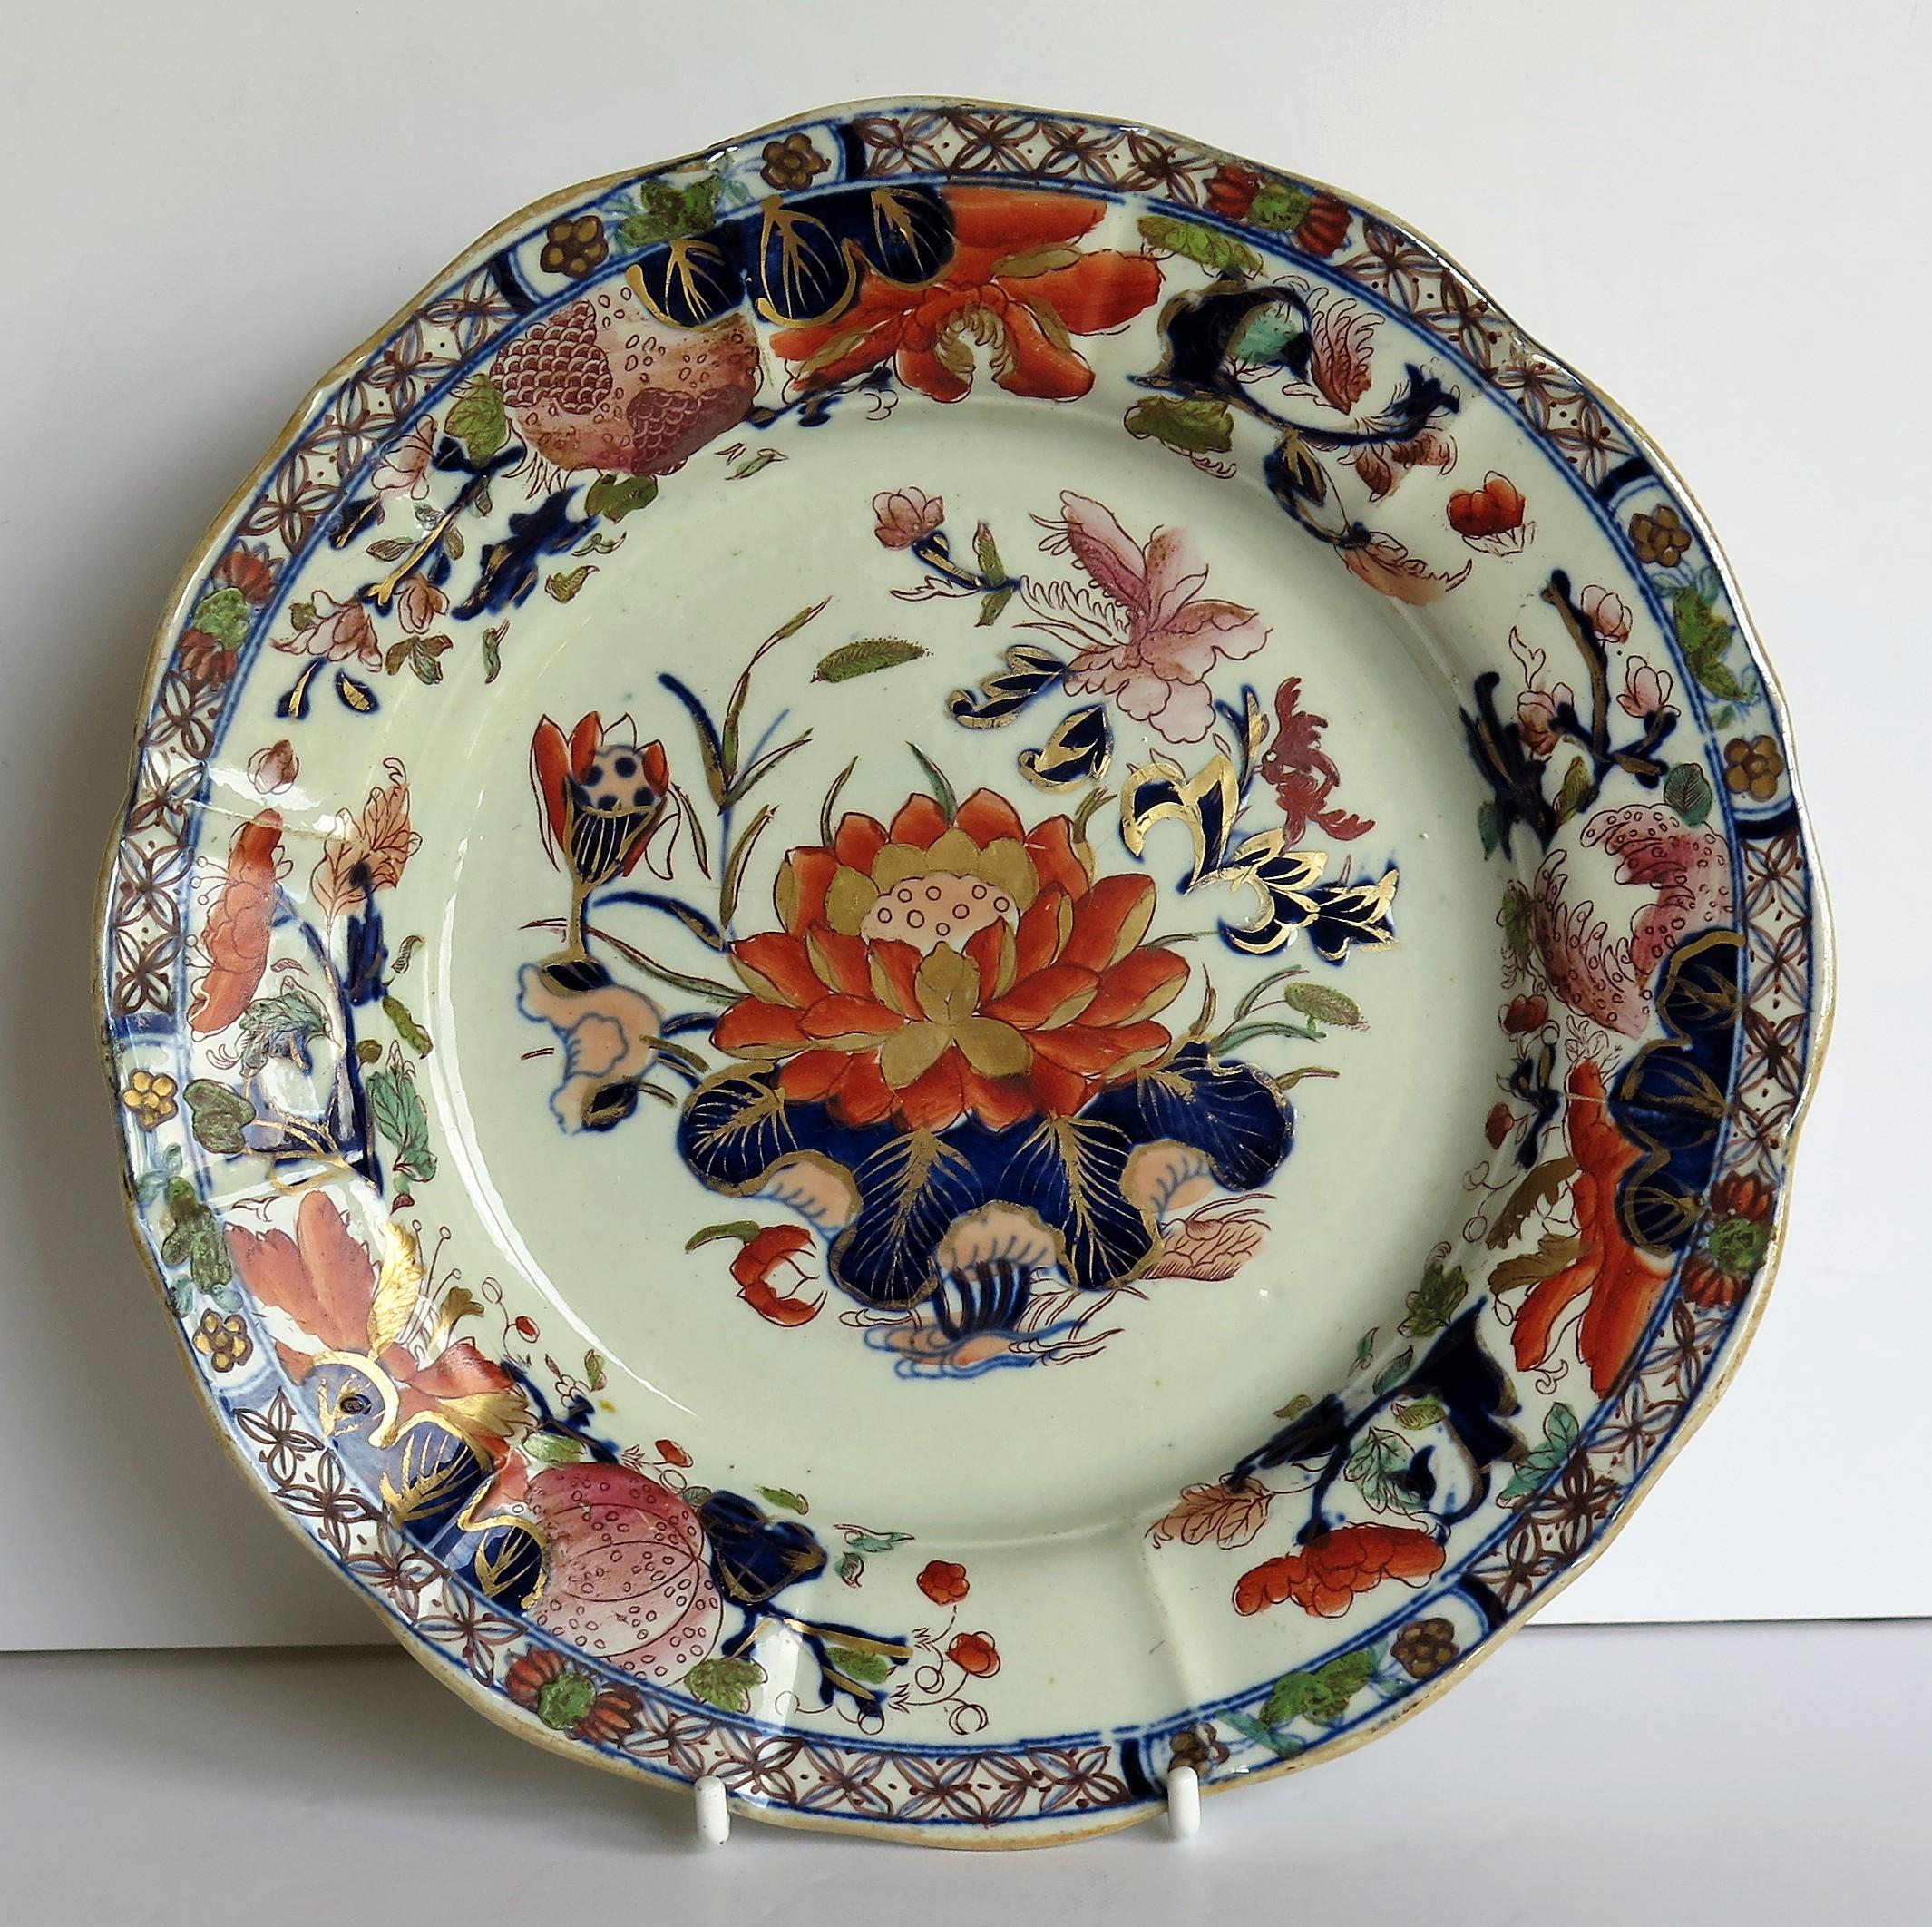 These is a good early Mason's Ironstone pottery deep Pplate or dish in the very decorative Water Lily pattern, produced by the Mason's factory at Lane Delph, Staffordshire, England, circa 1815.

The plate is circular with radial ribs and a